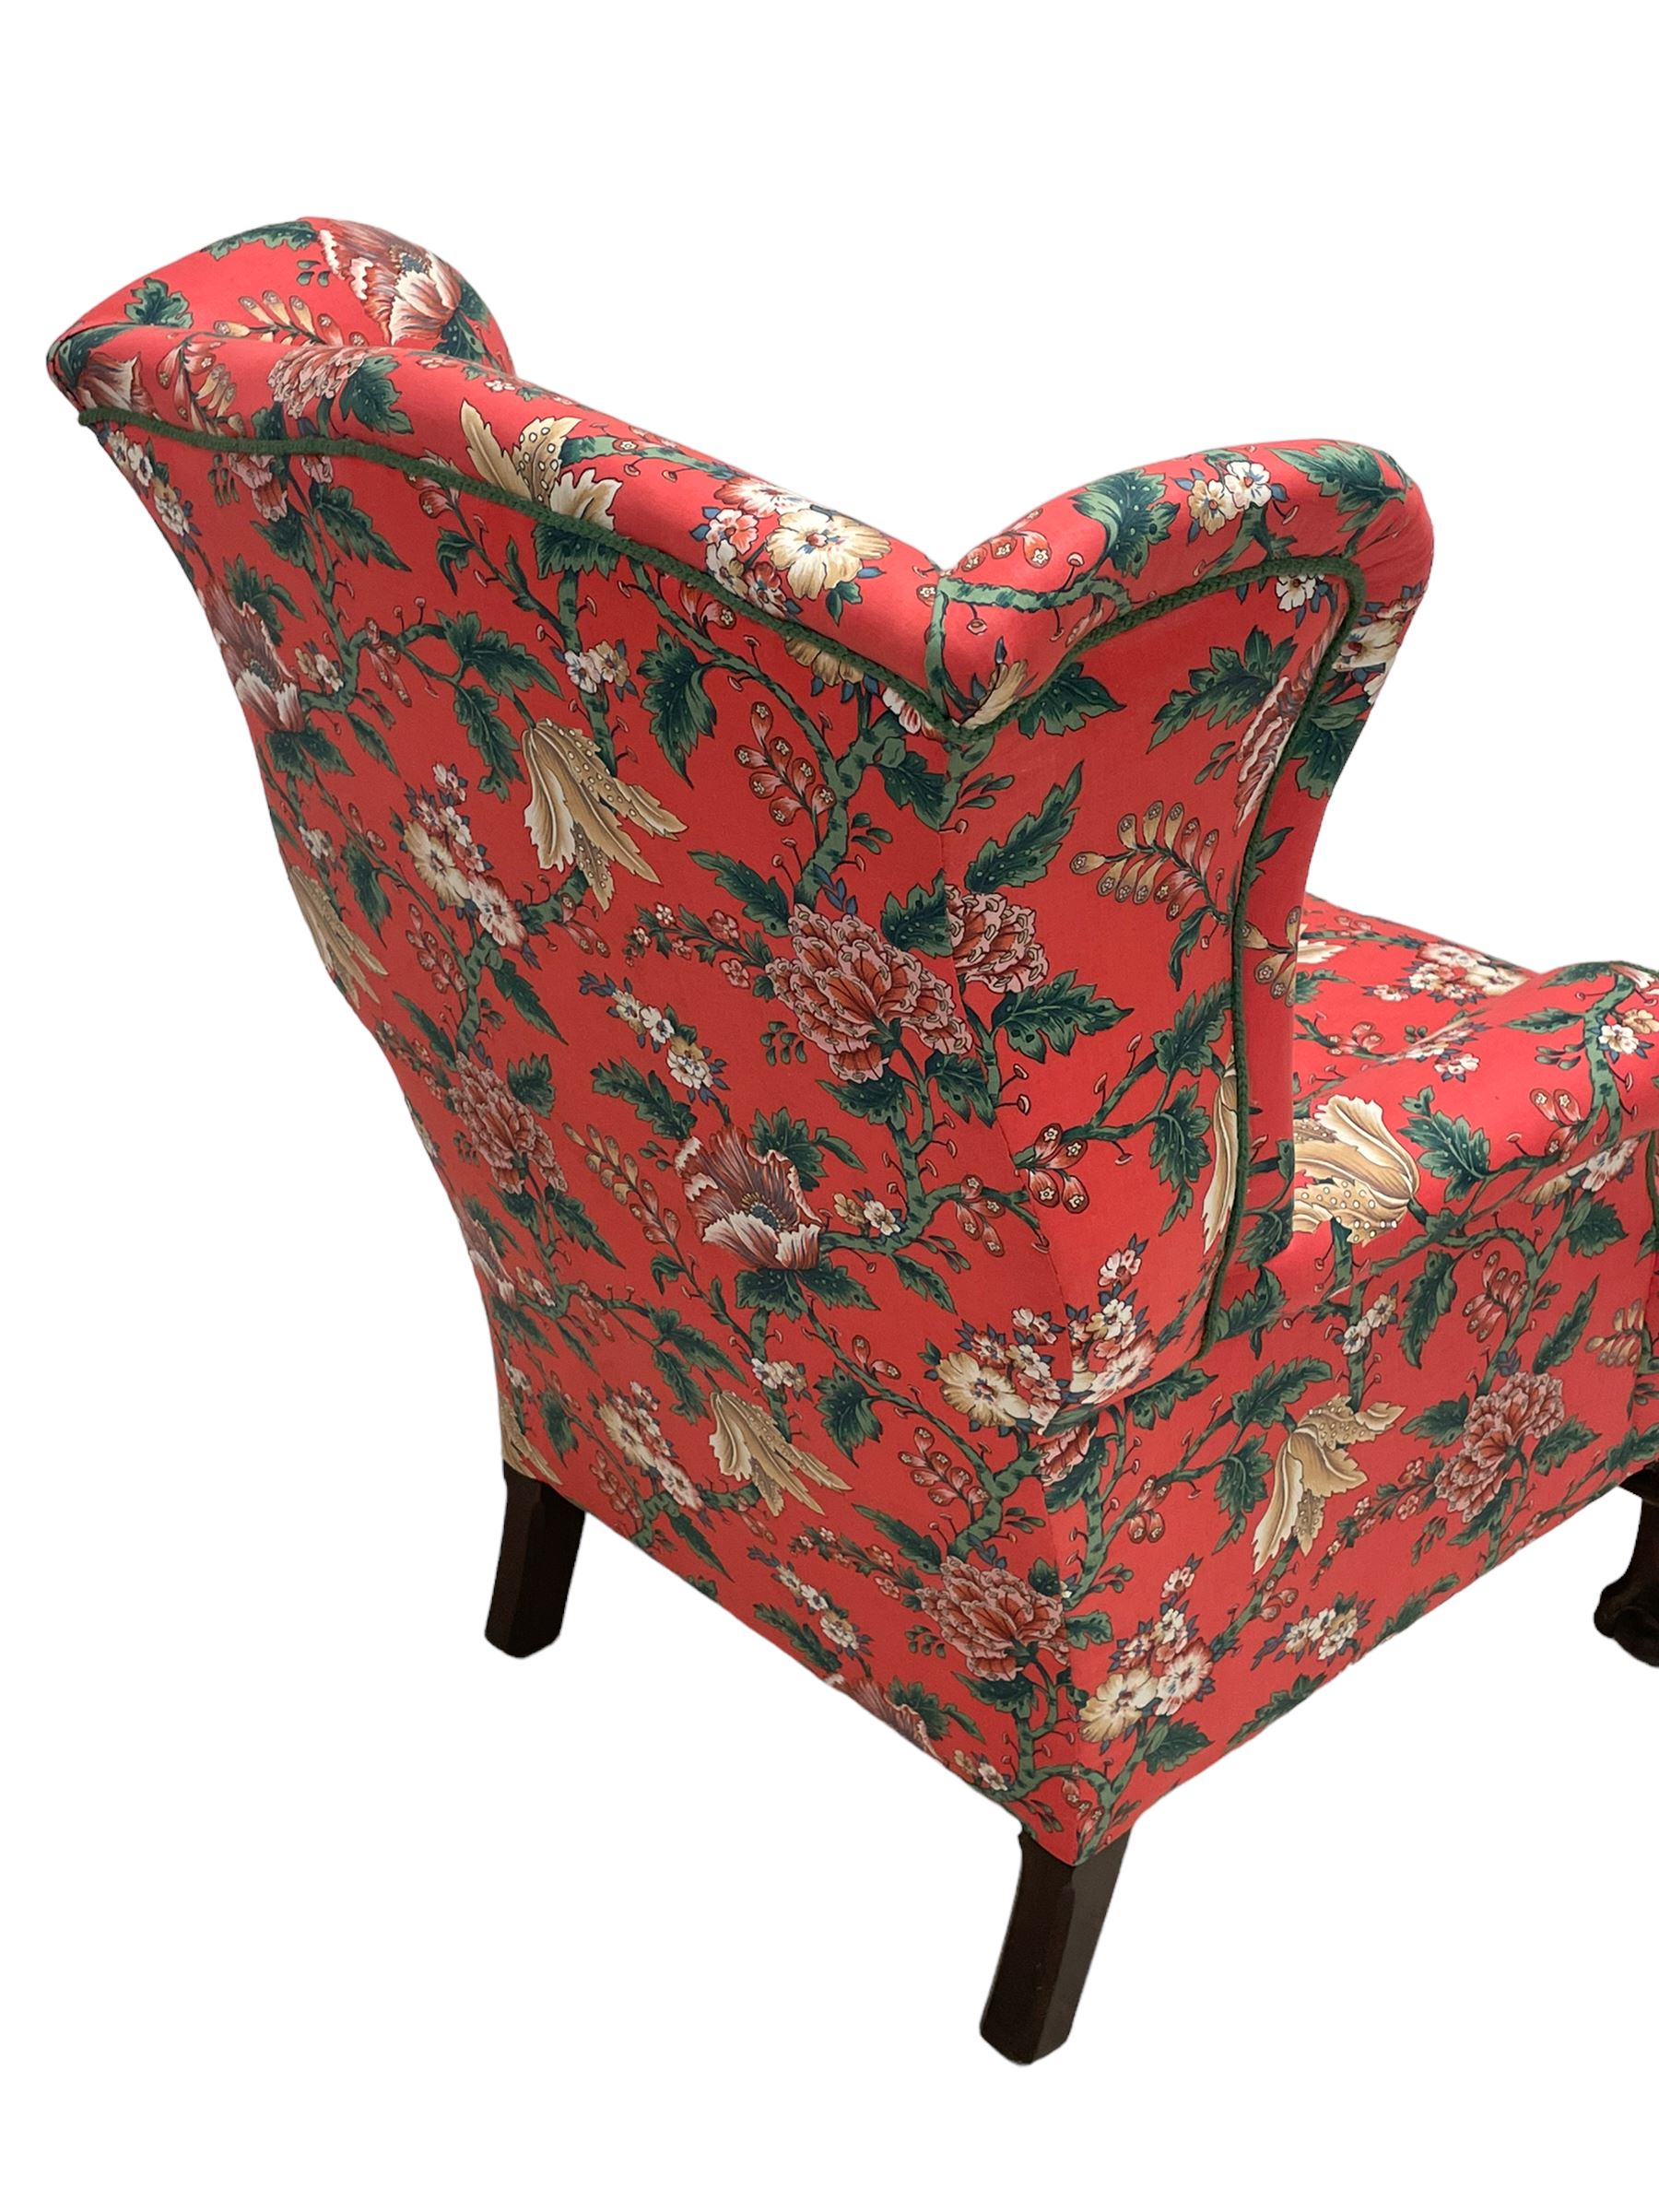 Late 19th to early 20th century wingback armchair - Image 7 of 9